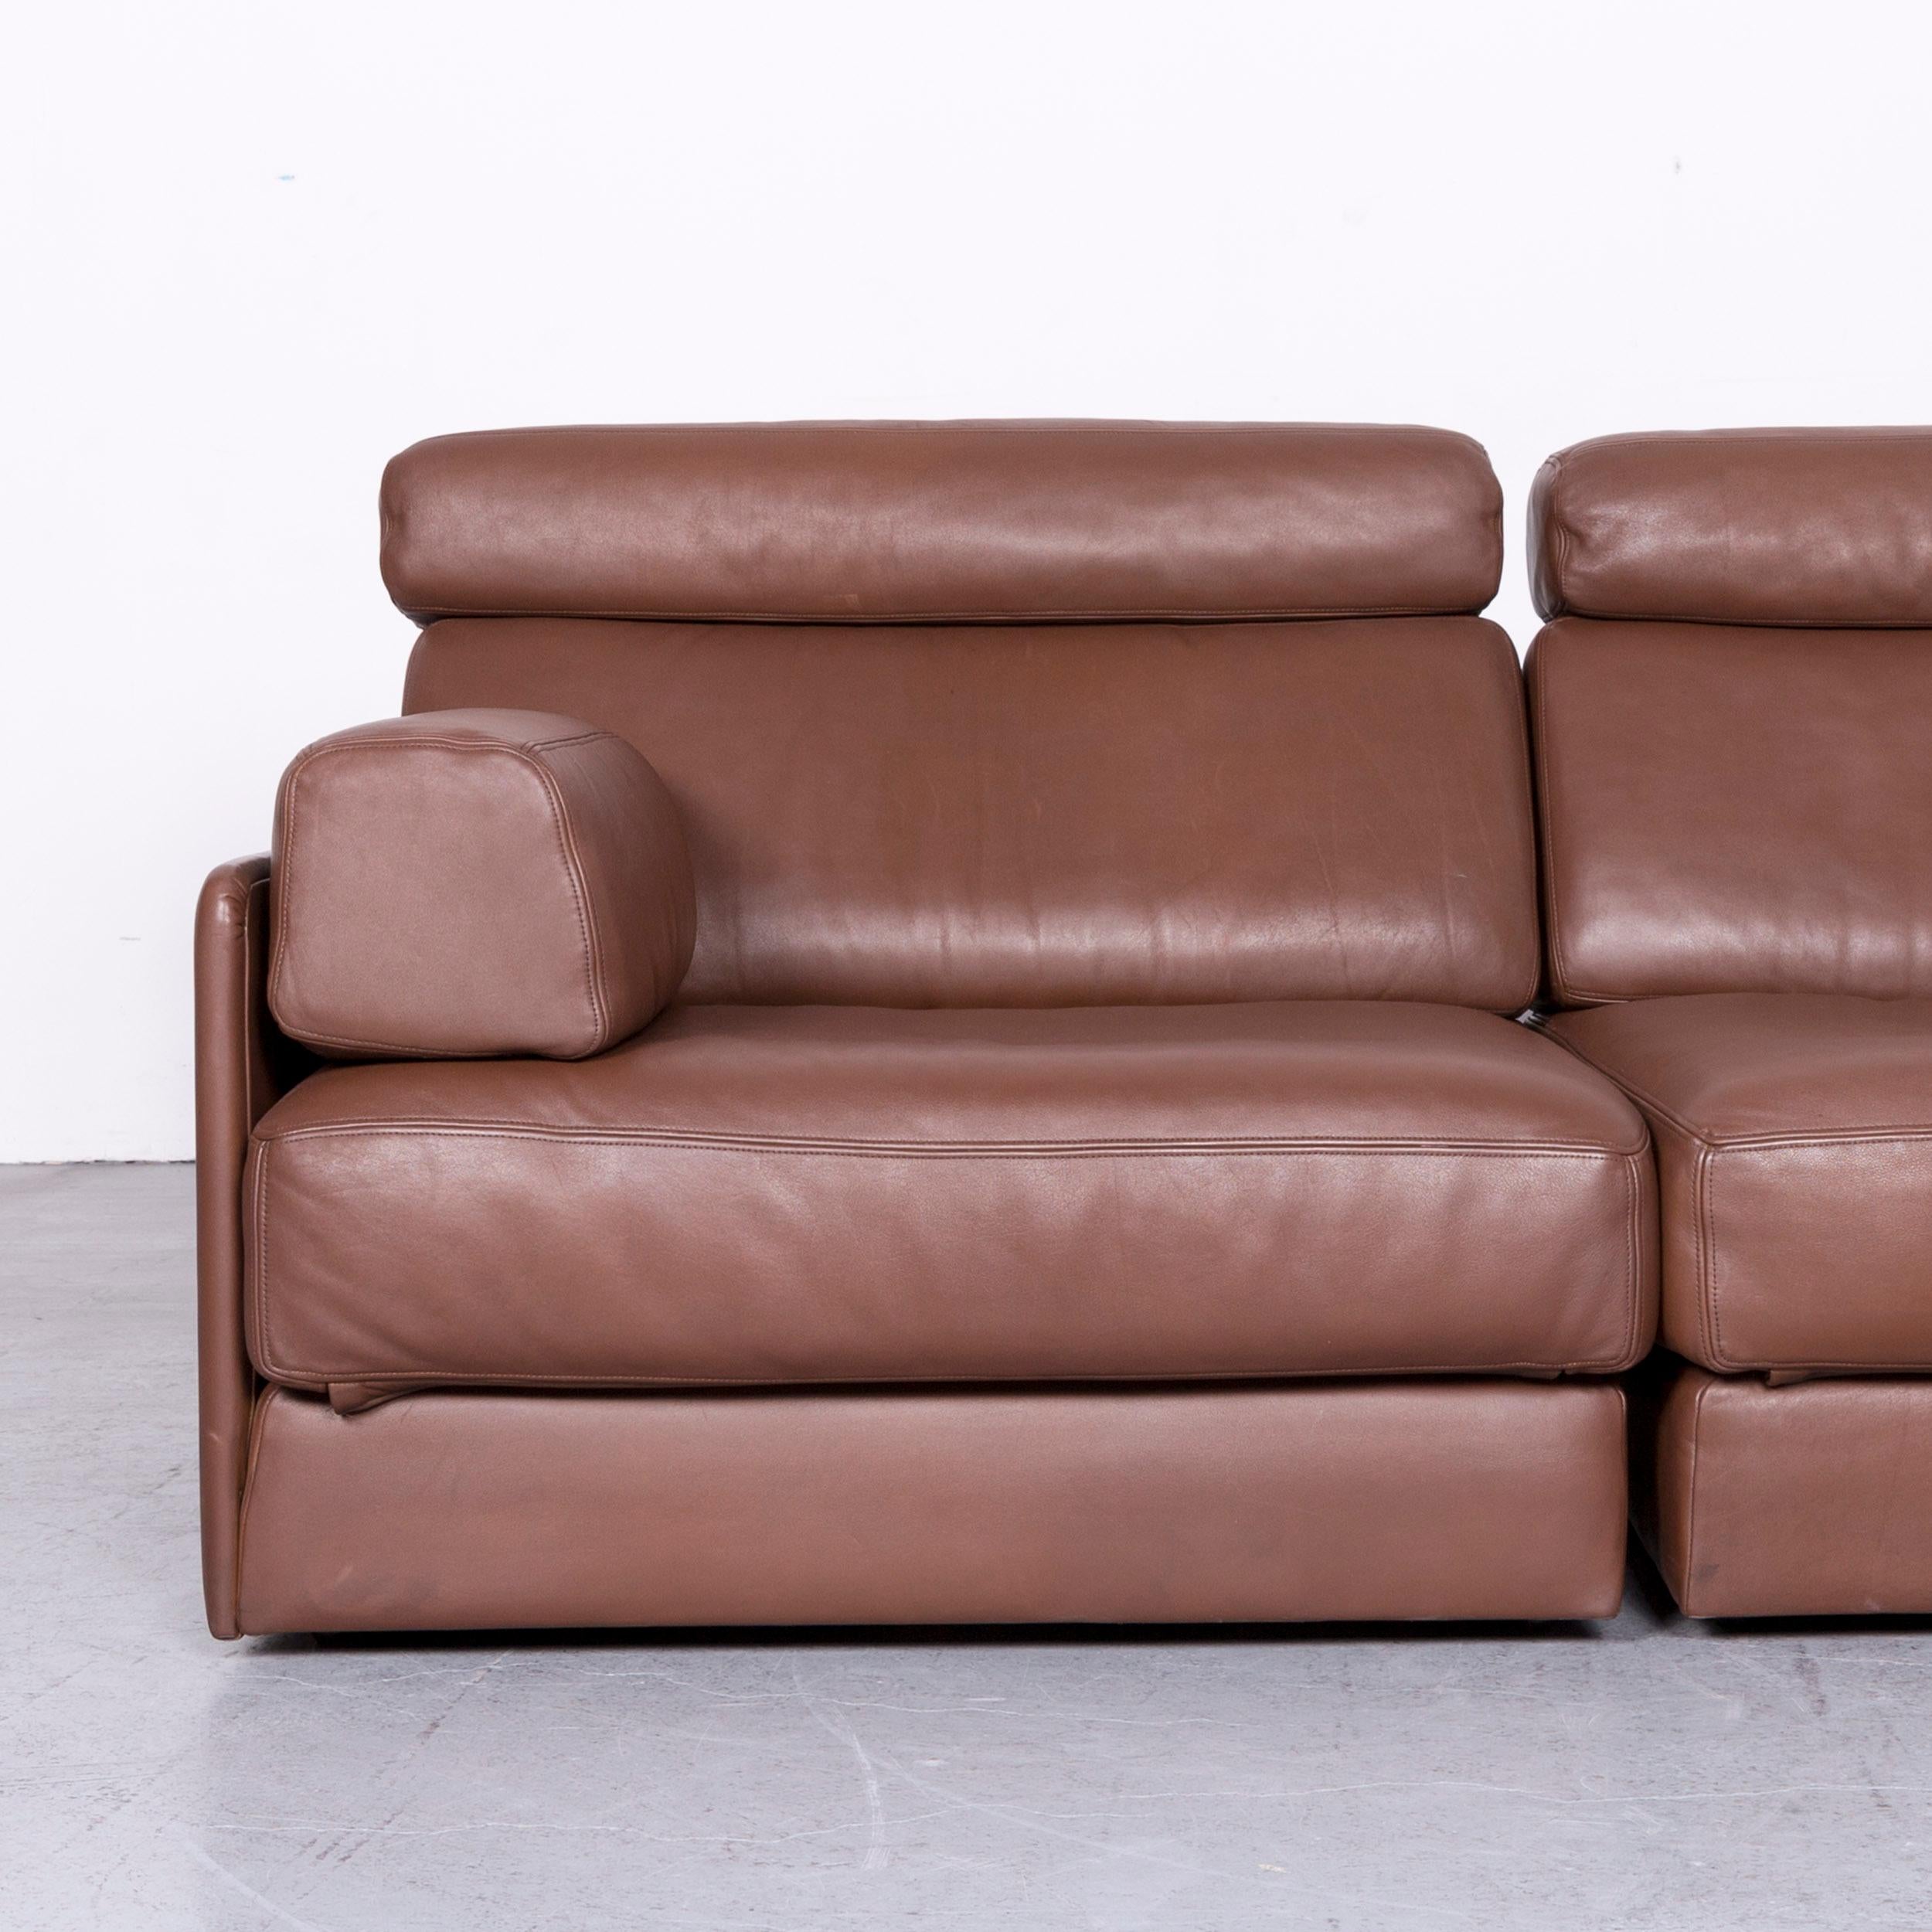 De Sede Ds 77 Designer Leather Sofa Brown Two-Seat Couch In Good Condition For Sale In Cologne, DE